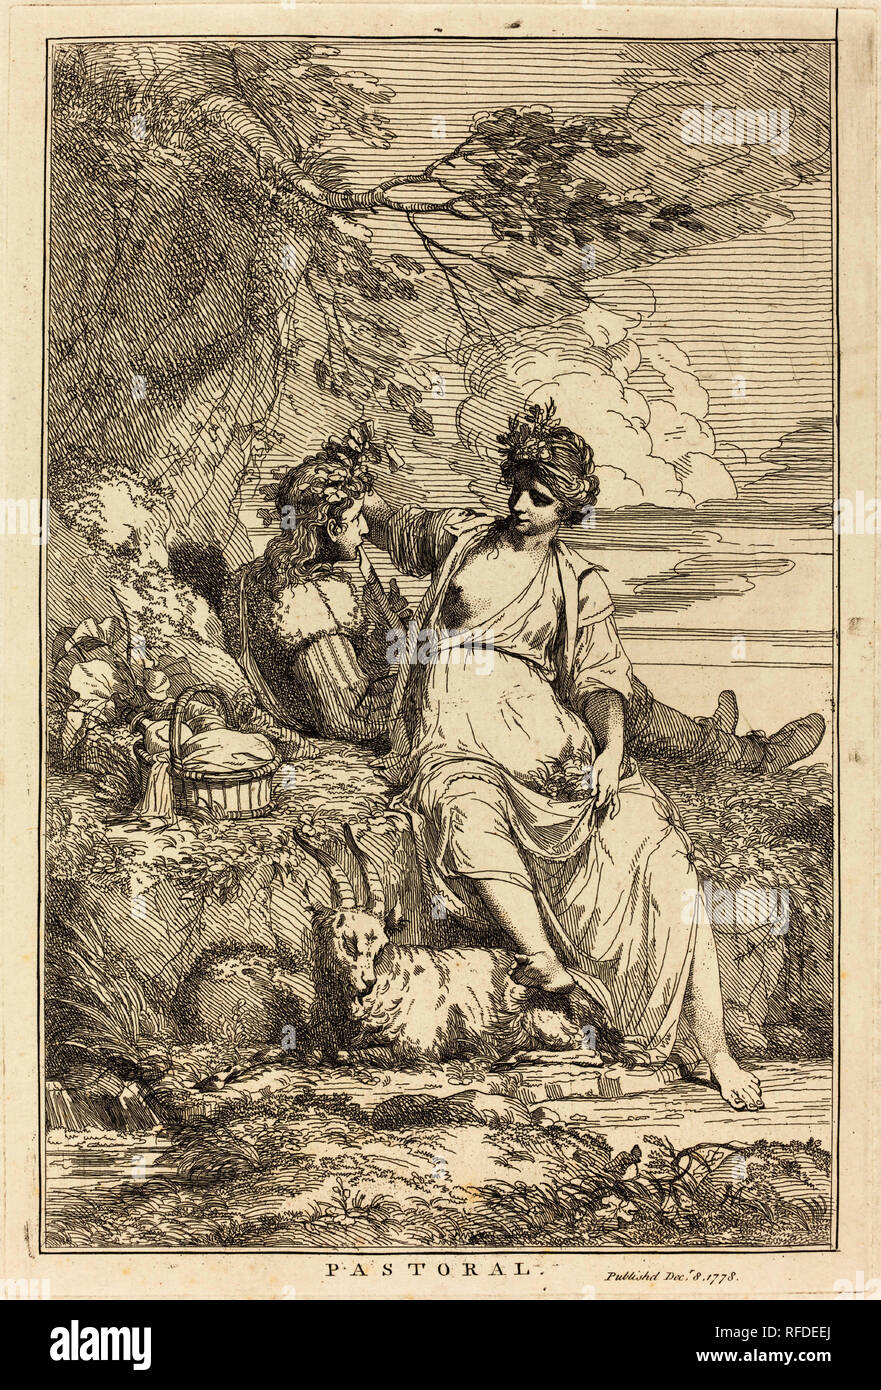 Pastoral. Dated: 1778. Dimensions: plate: 29.9 × 20 cm (11 3/4 × 7 7/8 in.)  sheet: 42.2 × 29.5 cm (16 5/8 × 11 5/8 in.). Medium: etching. Museum: National Gallery of Art, Washington DC. Author: John Hamilton Mortimer. Stock Photo